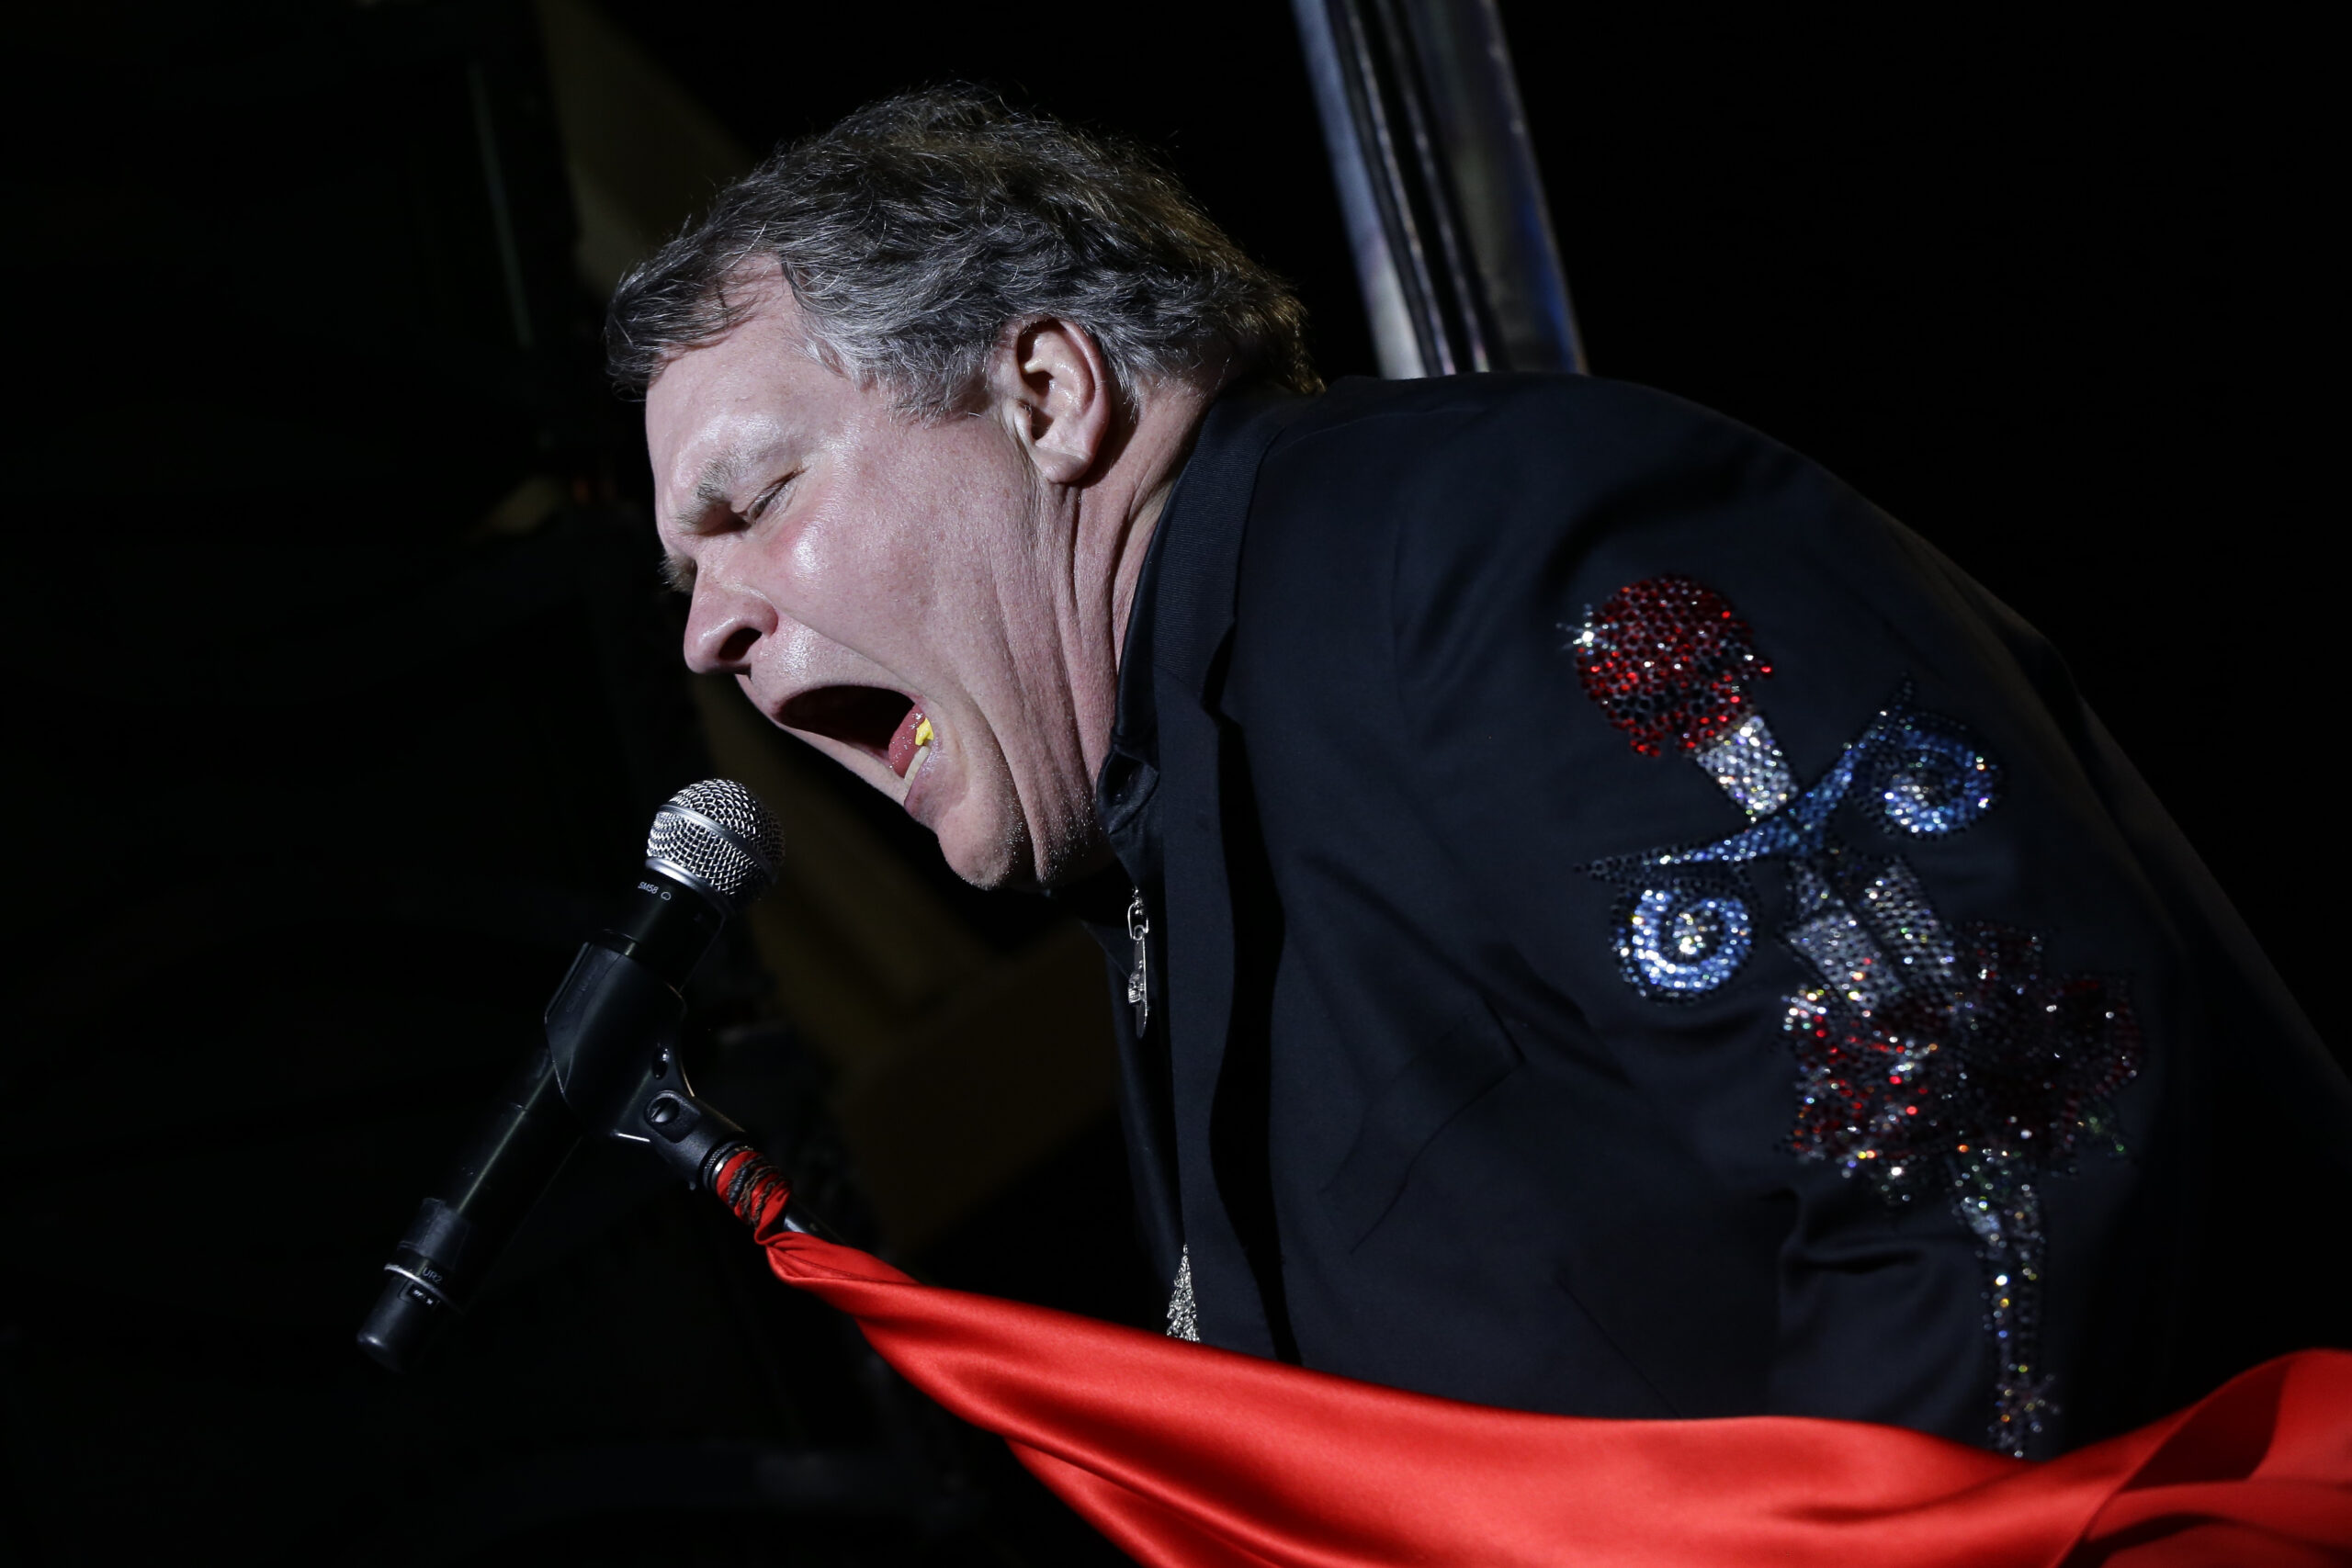 FILE - Singer Meat Loaf performs in support of Republican presidential candidate and former Massachusetts Gov. Mitt Romney at the football stadium at Defiance High School in Defiance, Ohio, Thursday, Oct. 25, 2012. Meat Loaf, whose "Bat Out Of Hell" album is one of the all time bestsellers, has died, family said on Facebook, Friday, Jan. 21, 2022. (AP Photo/Charles Dharapak, File)